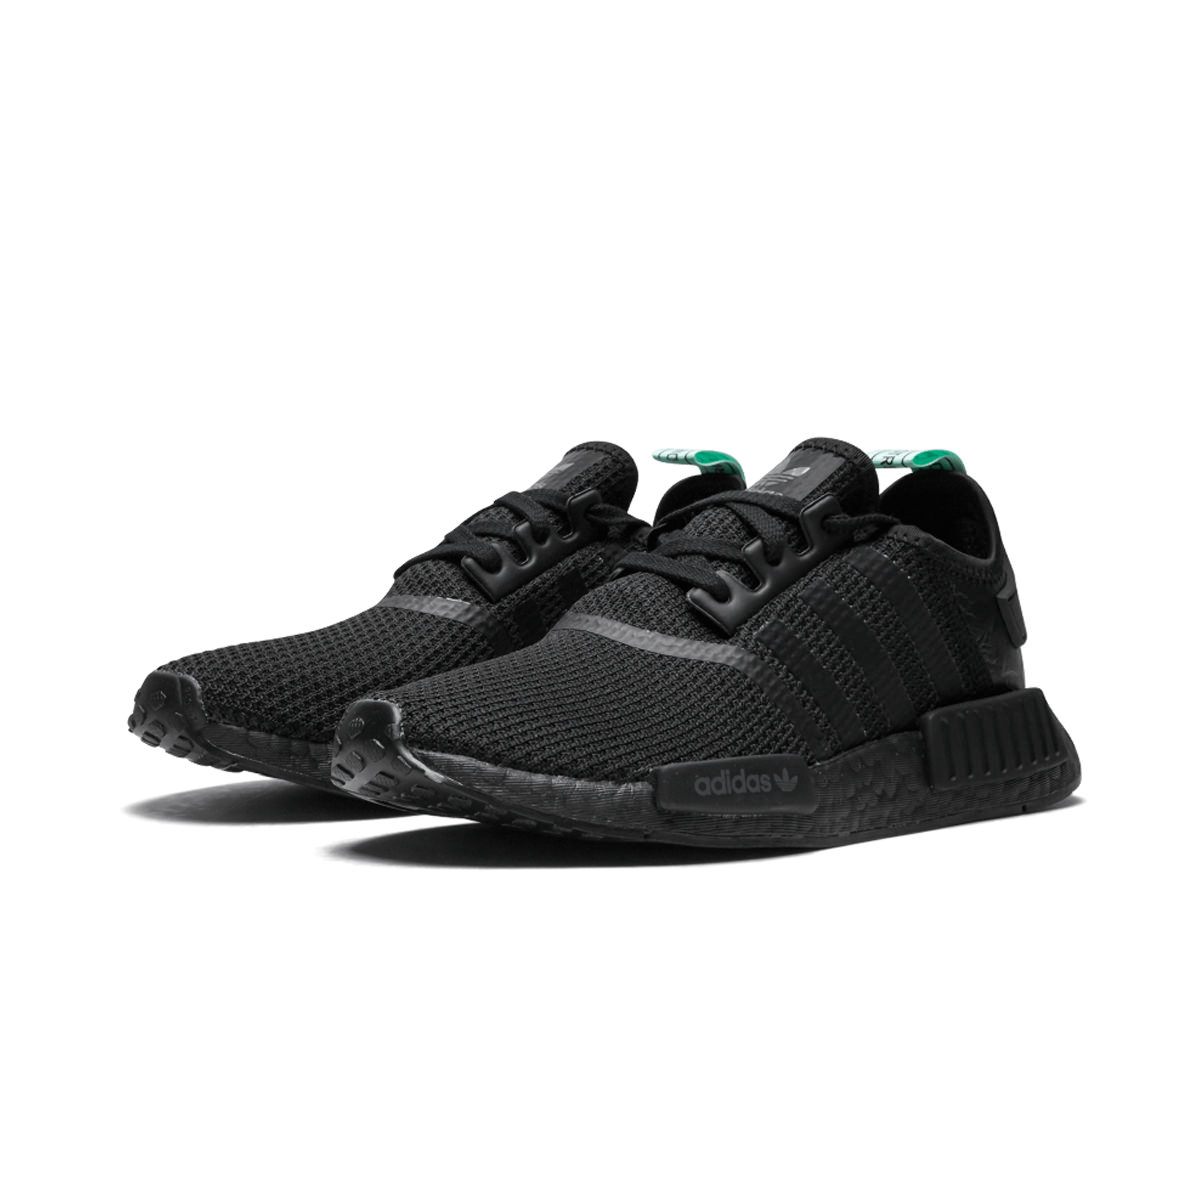 adidas nmd r1 womens black and mint